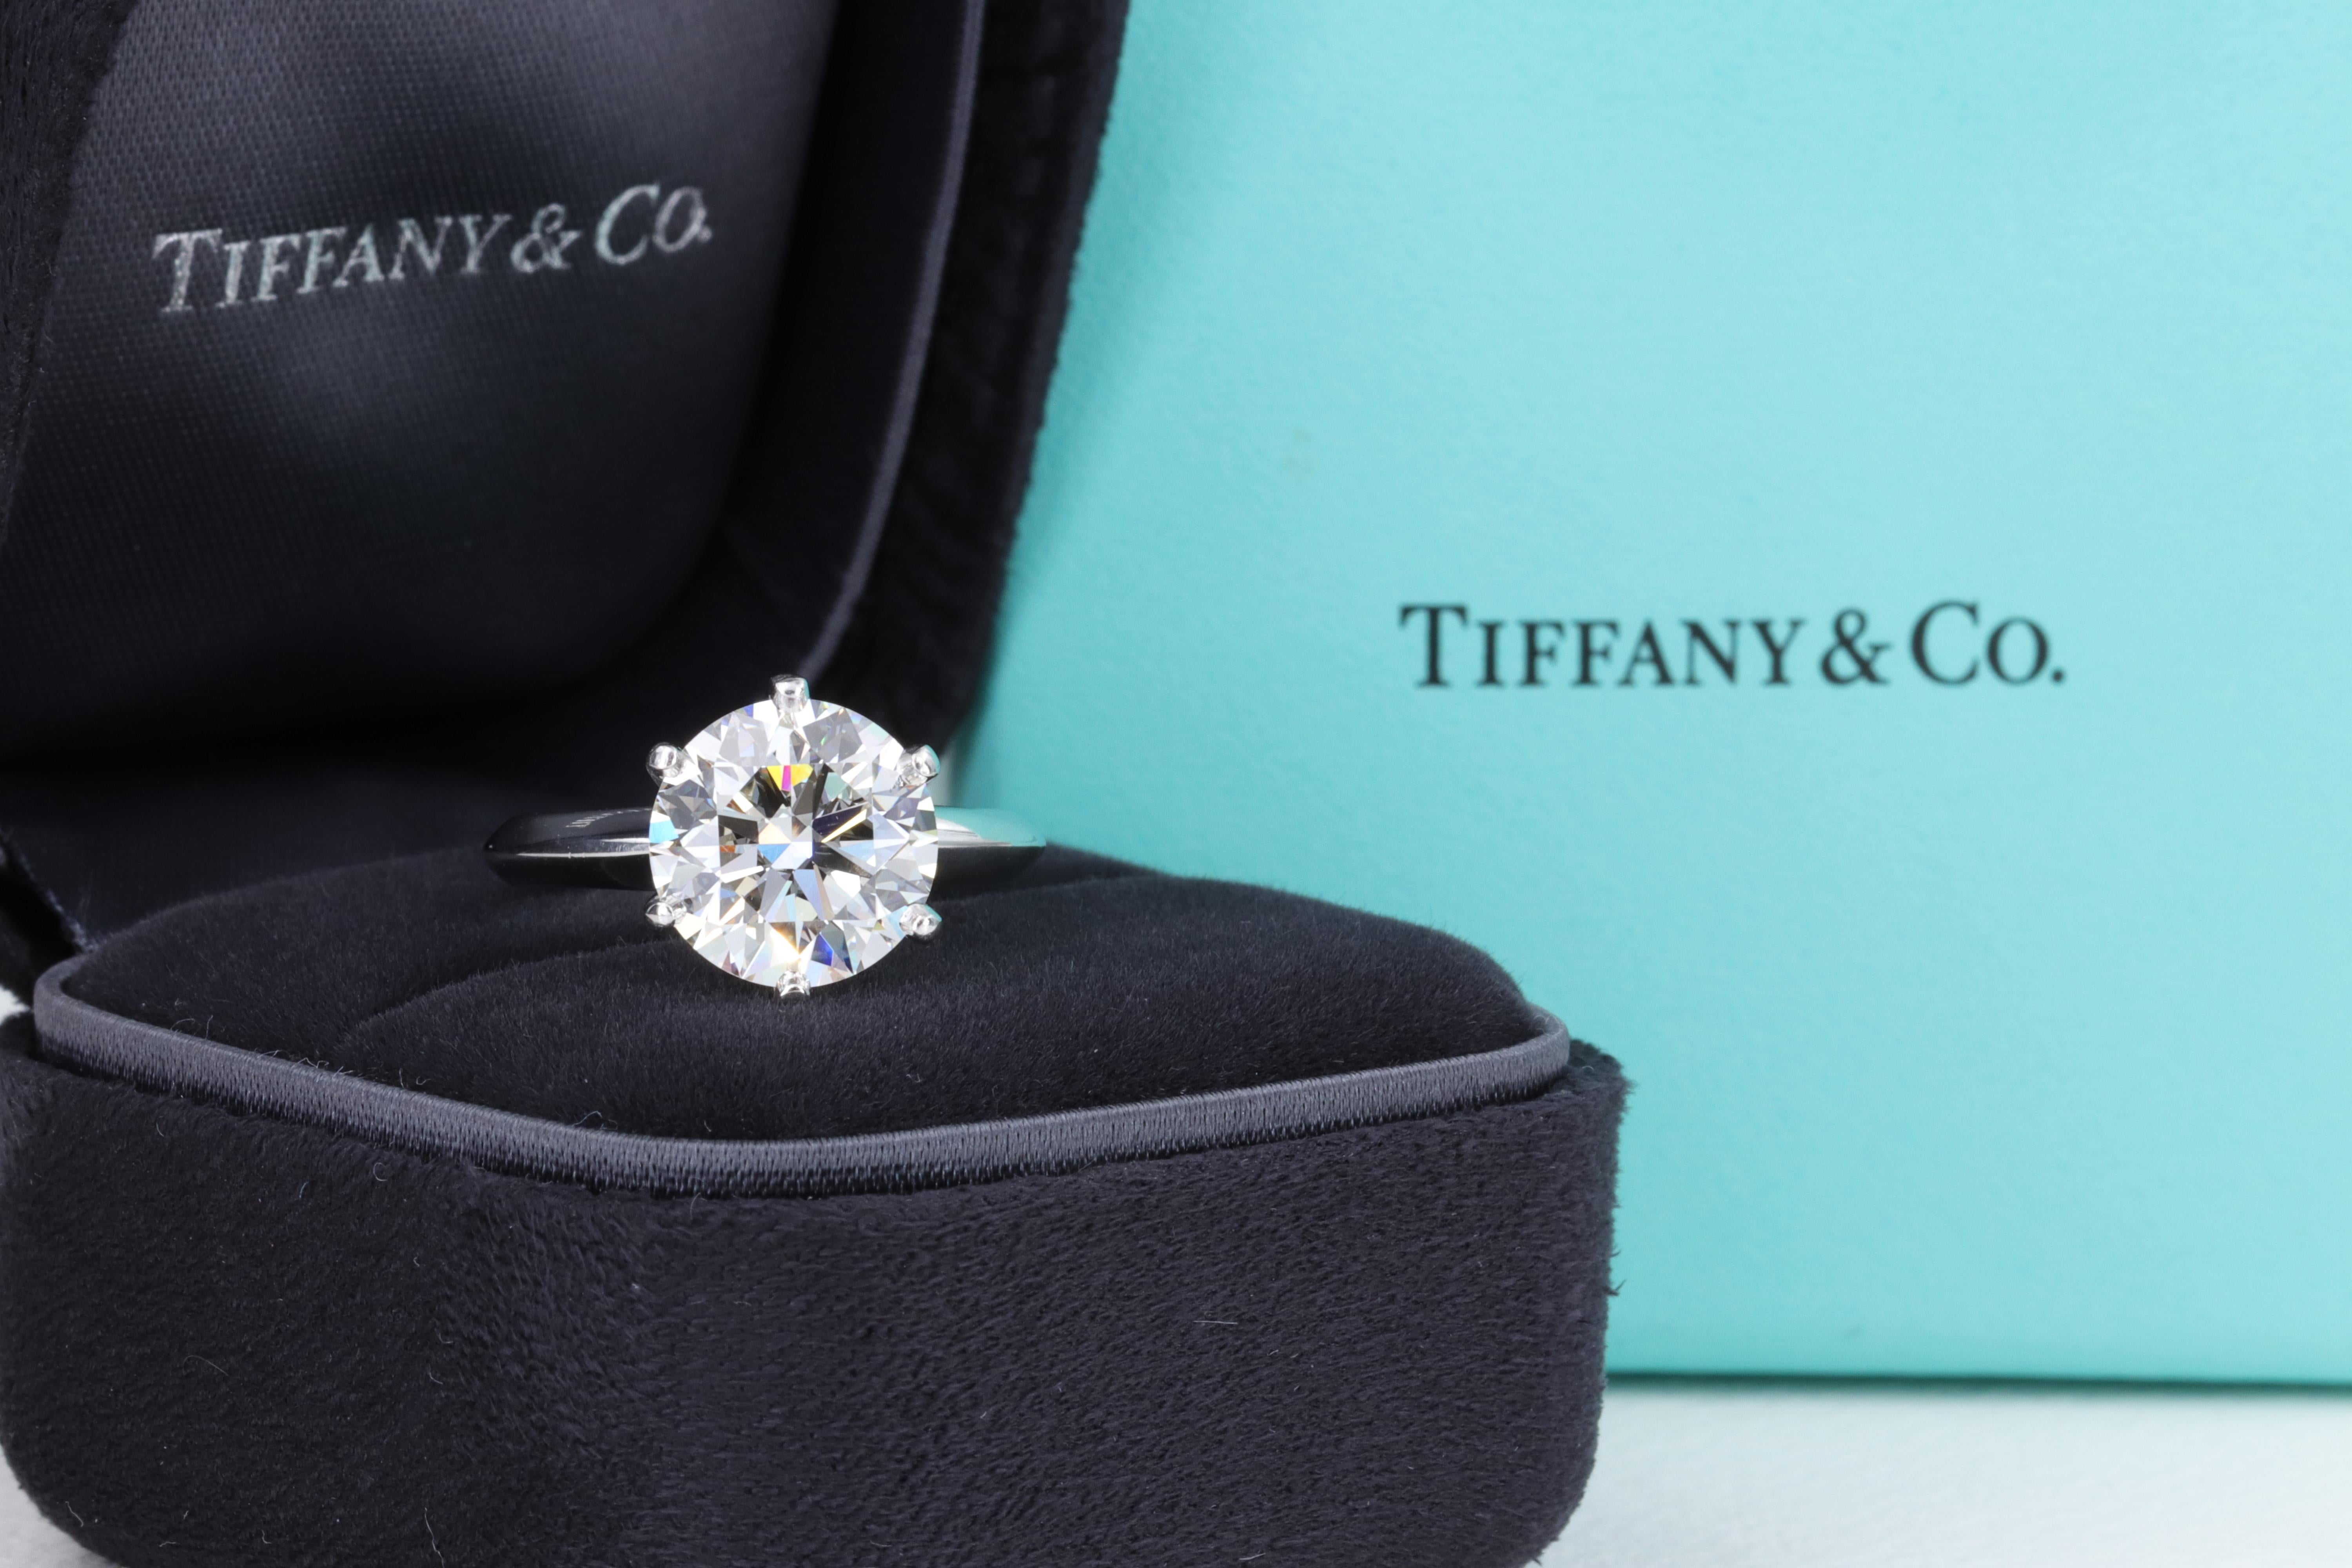 4.08 Carat I VS1 Tiffany & Co. Platinum Solitaire Engagement Ring

Includes original Tiffany & Co. box, diamond grading report and valuation report. 